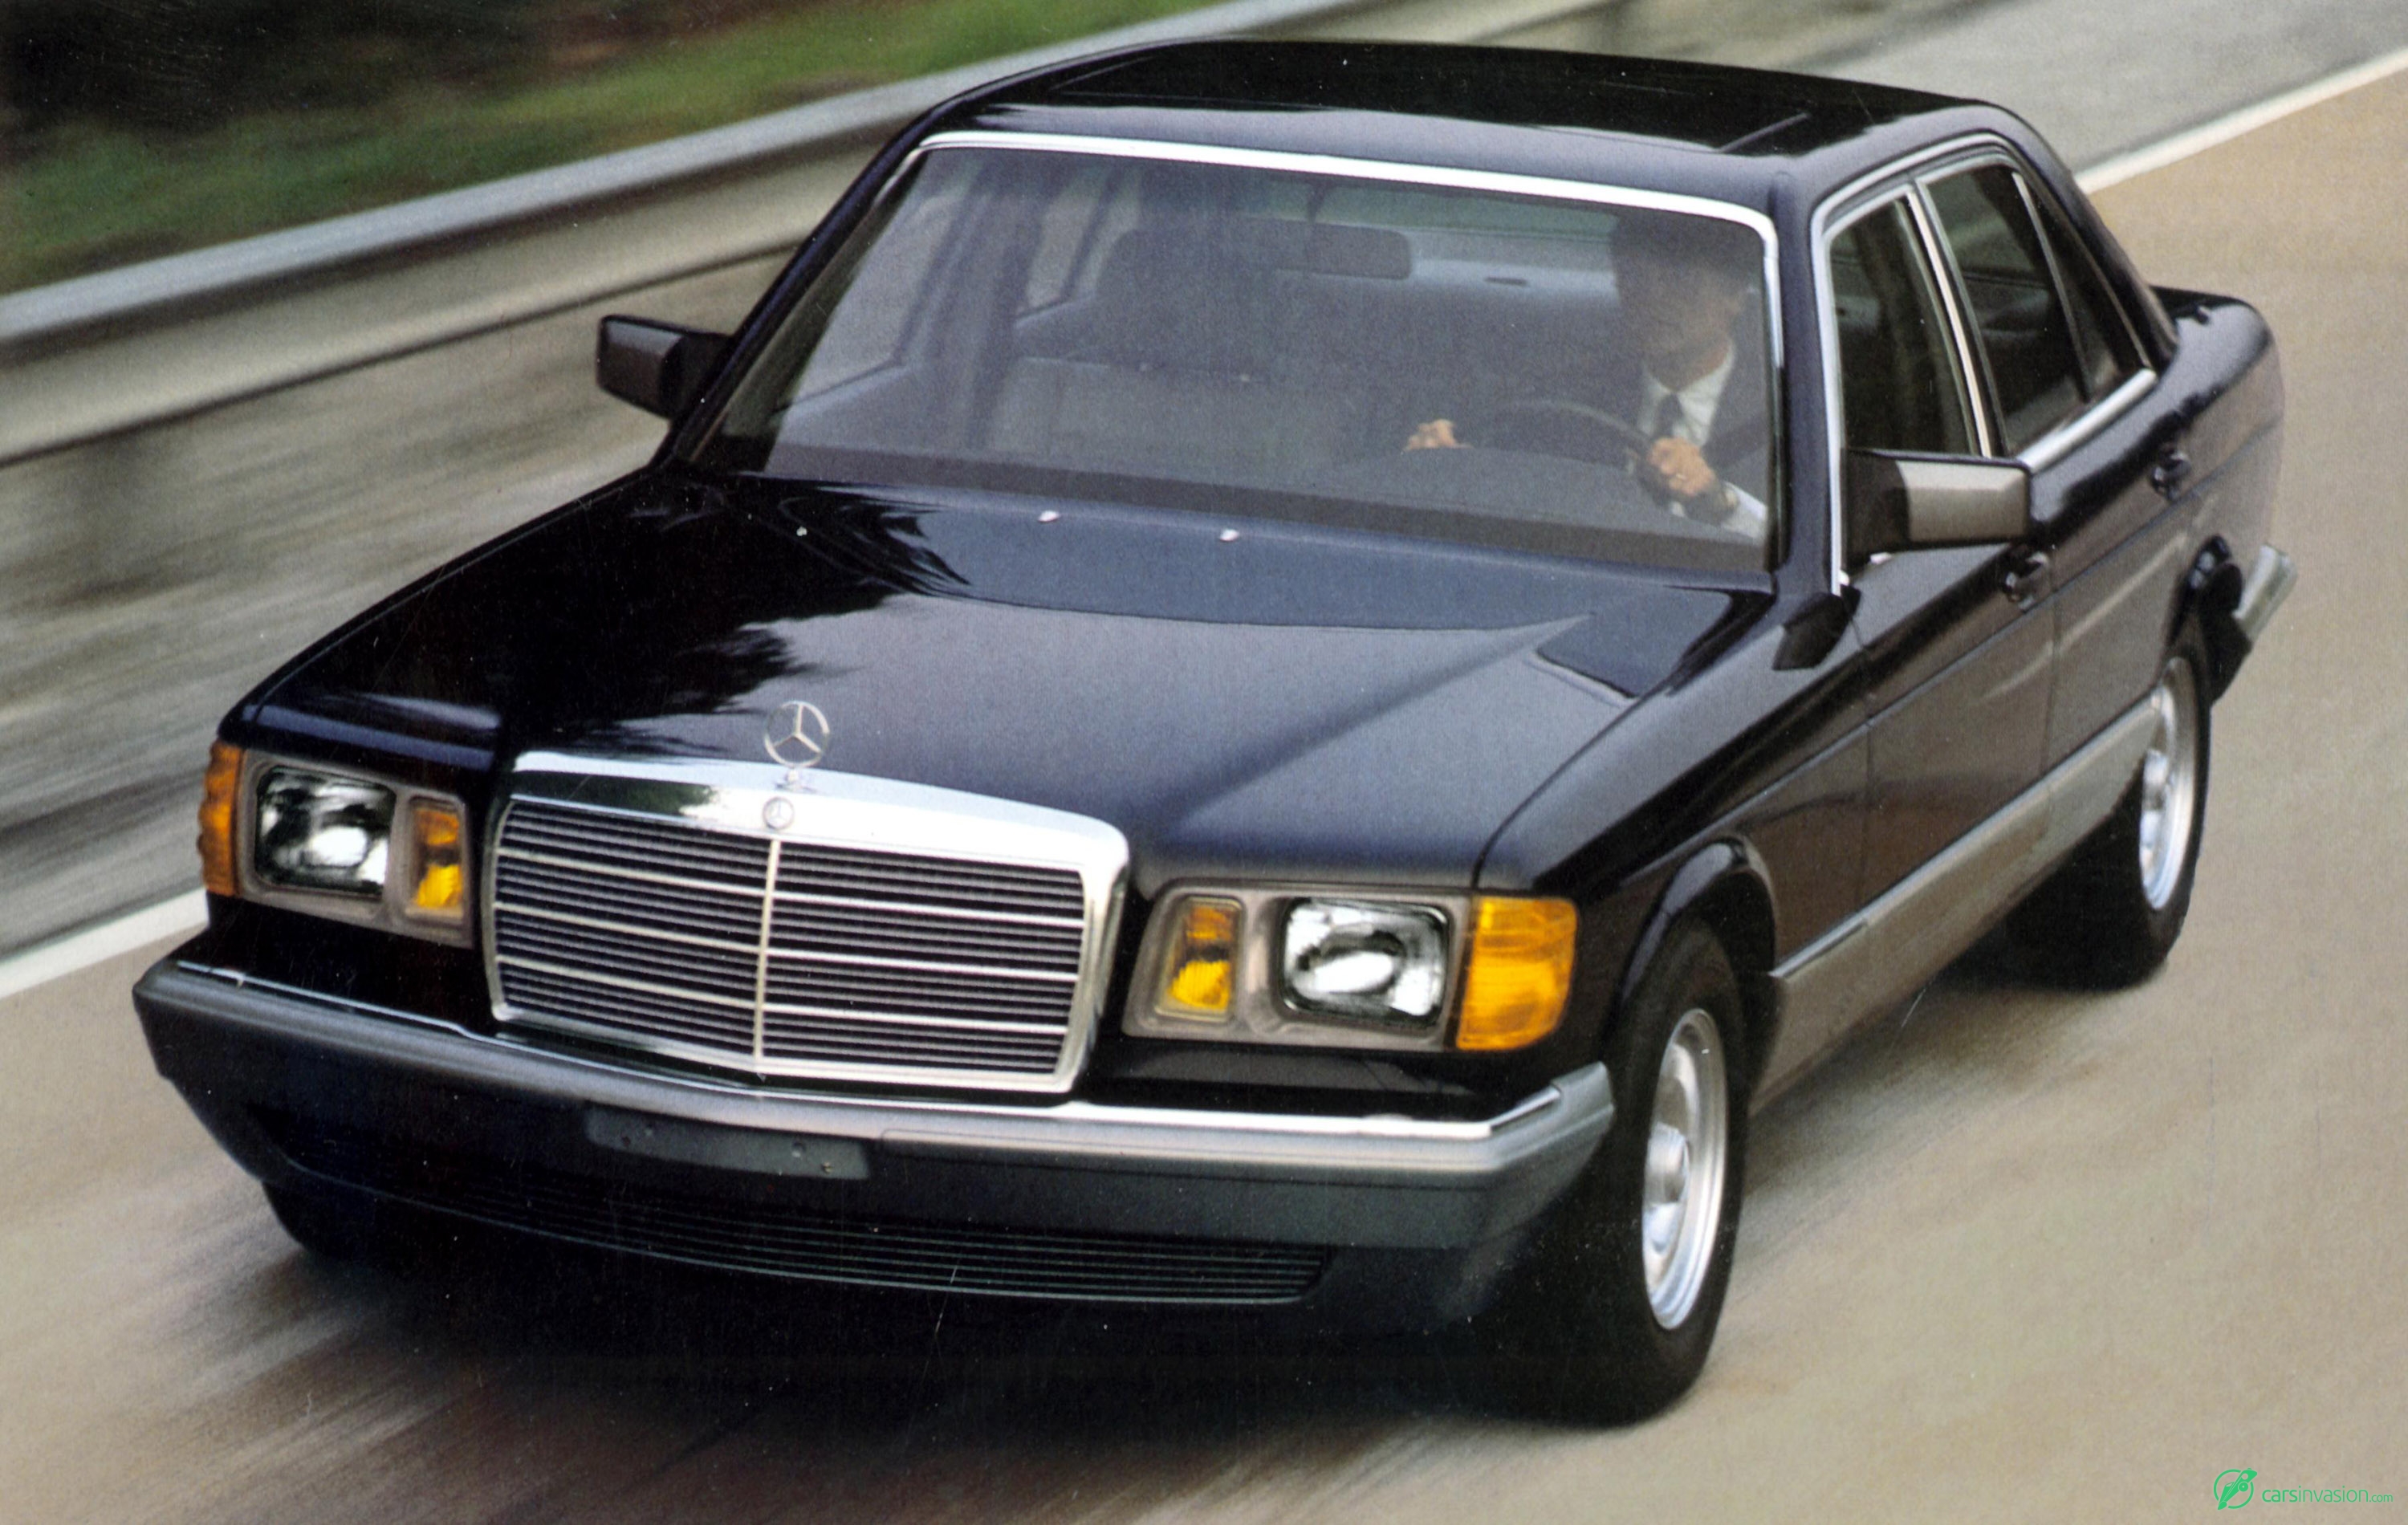 1979 Mercedes-Benz S-Class W126 - HD Pictures ...